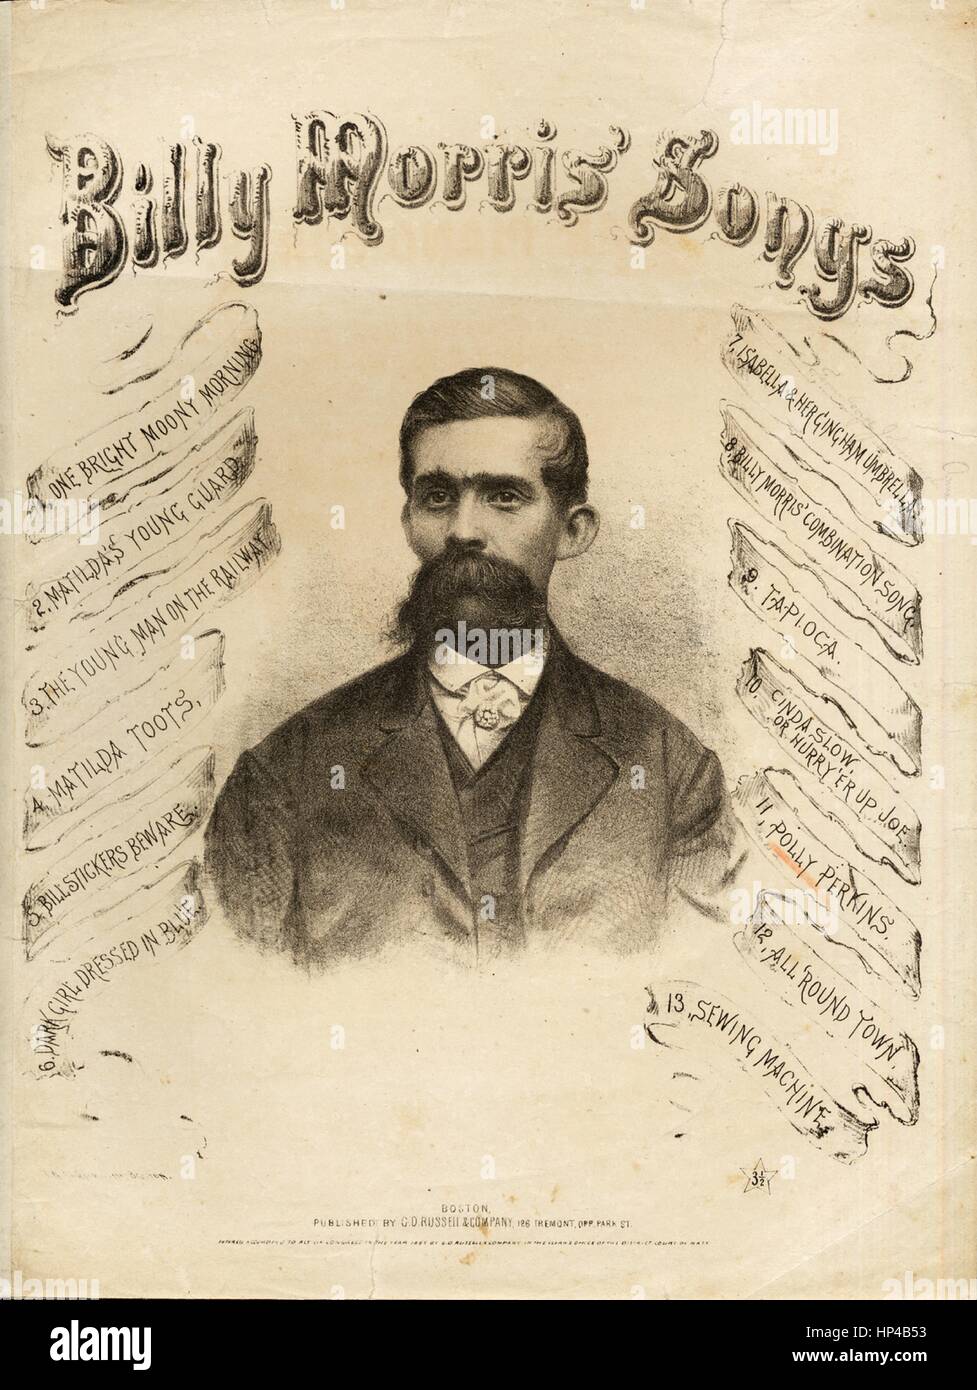 Sheet music cover image of the song 'Polly Perkins of Abington Green Billy Morris' Songs', with original authorship notes reading 'Written and Composed by Harry Clifton', United States, 1864. The publisher is listed as 'G.D. Russell and Company, 126 Tremont, Opp. Park St.', the form of composition is 'strophic with chorus', the instrumentation is 'piano and voice', the first line reads 'I'm a brokenhearted milkman, in grief I'm arrayed', and the illustration artist is listed as 'Photo. by Black'. Stock Photo